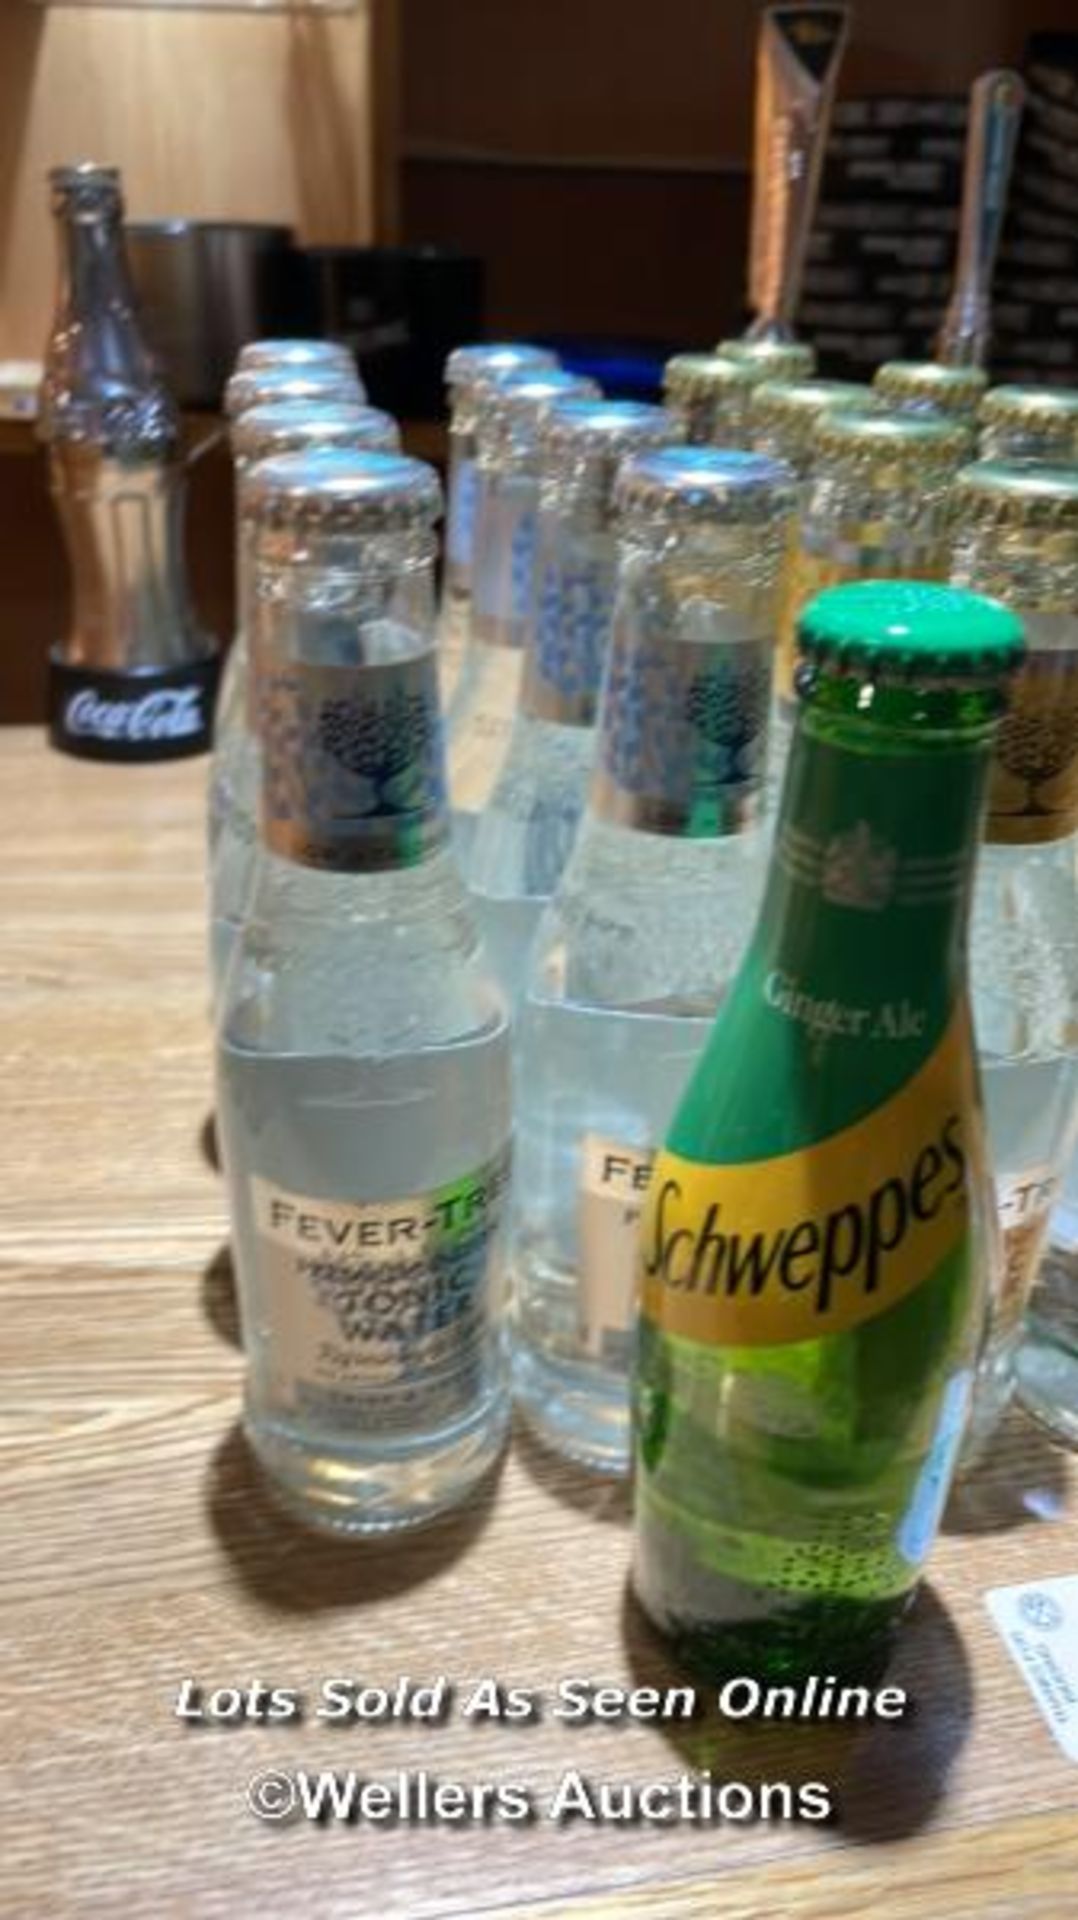 9X FEVER-TREE PREMIUM INDIAN TONIC WATER, 8X LOW CALORE INDIAN TONIC WATER AND 1X BOTTLE OF - Image 3 of 3